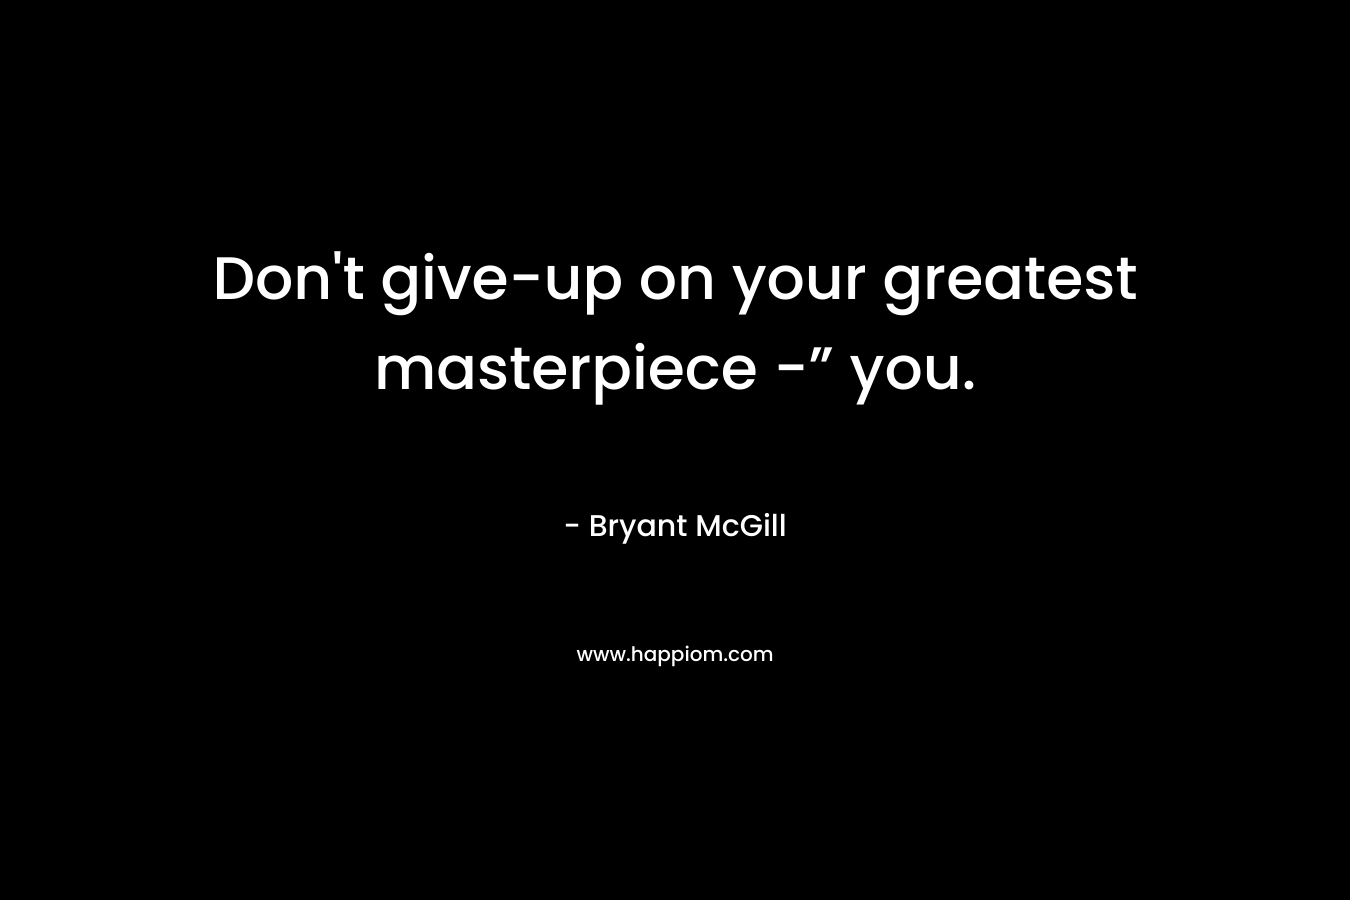 Don't give-up on your greatest masterpiece -” you.